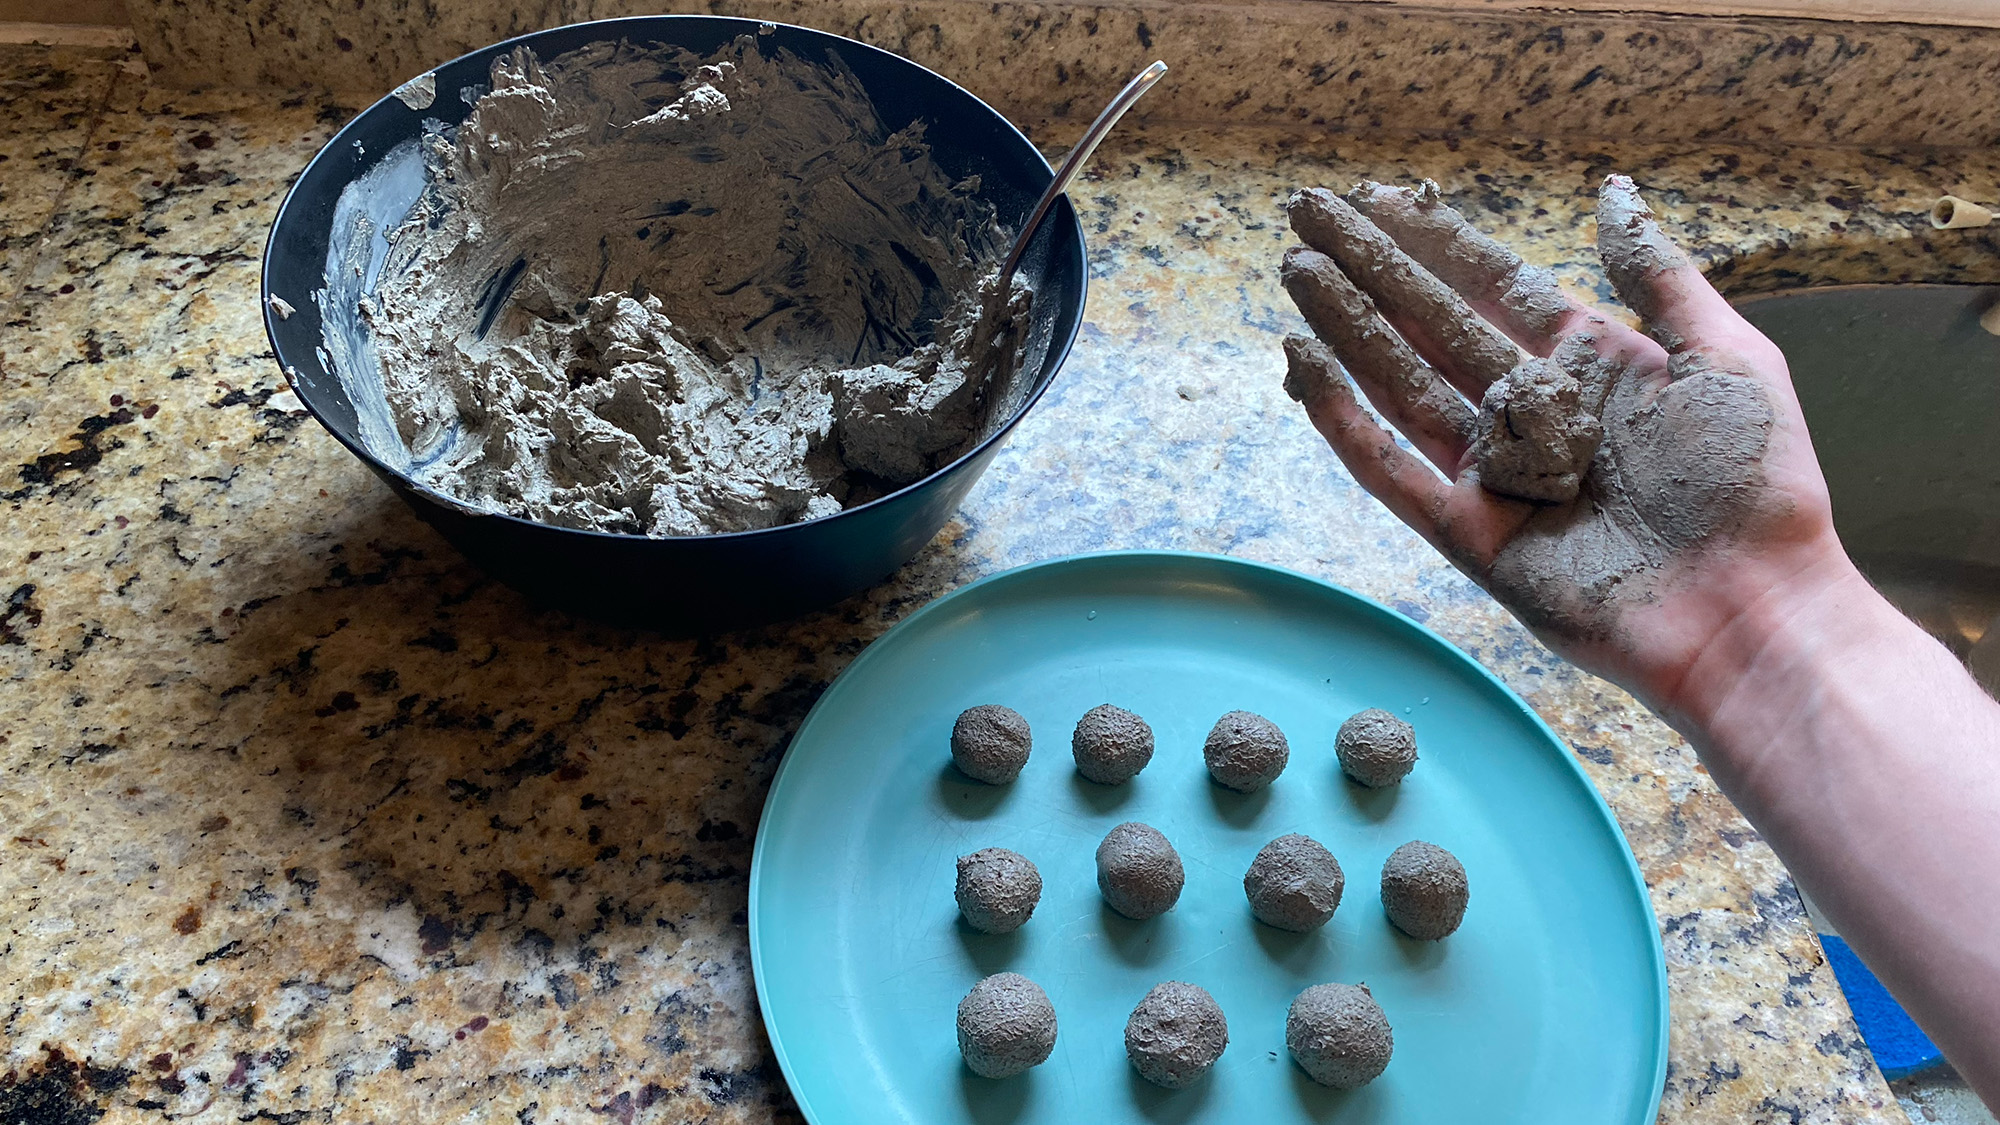 Kitchen counter with a bowl of seed bomb mix, a plate with drying bombs, and a hand holding an unfinished bomb.